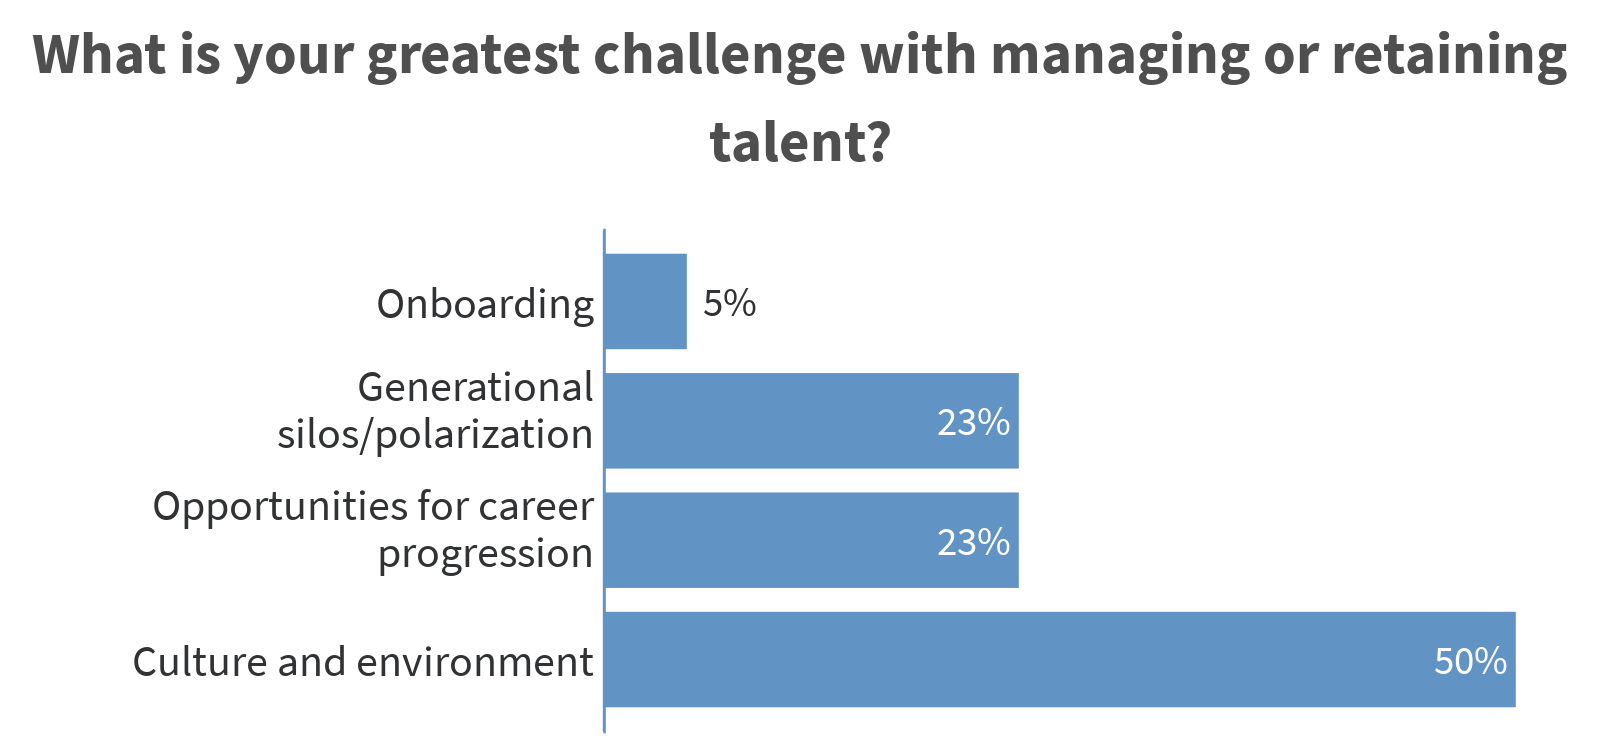 5-what-is-your-greatest-challenge-with-managing-or-1